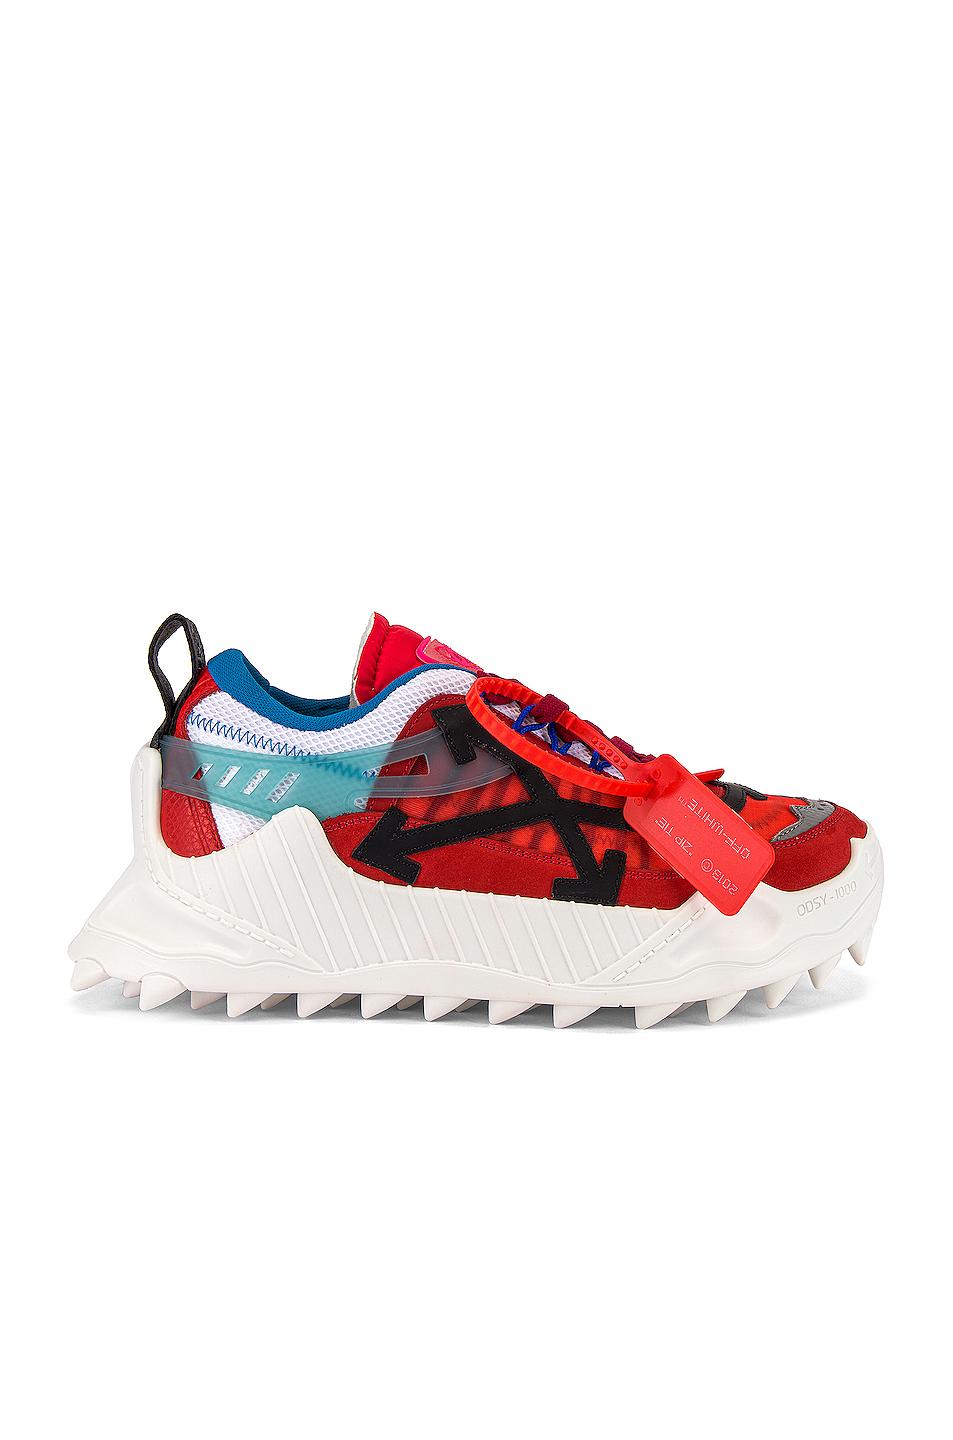 Off-White c/o Virgil Abloh Odsy-1000 Sneakers in Red & Black (Red) for Men  - Lyst